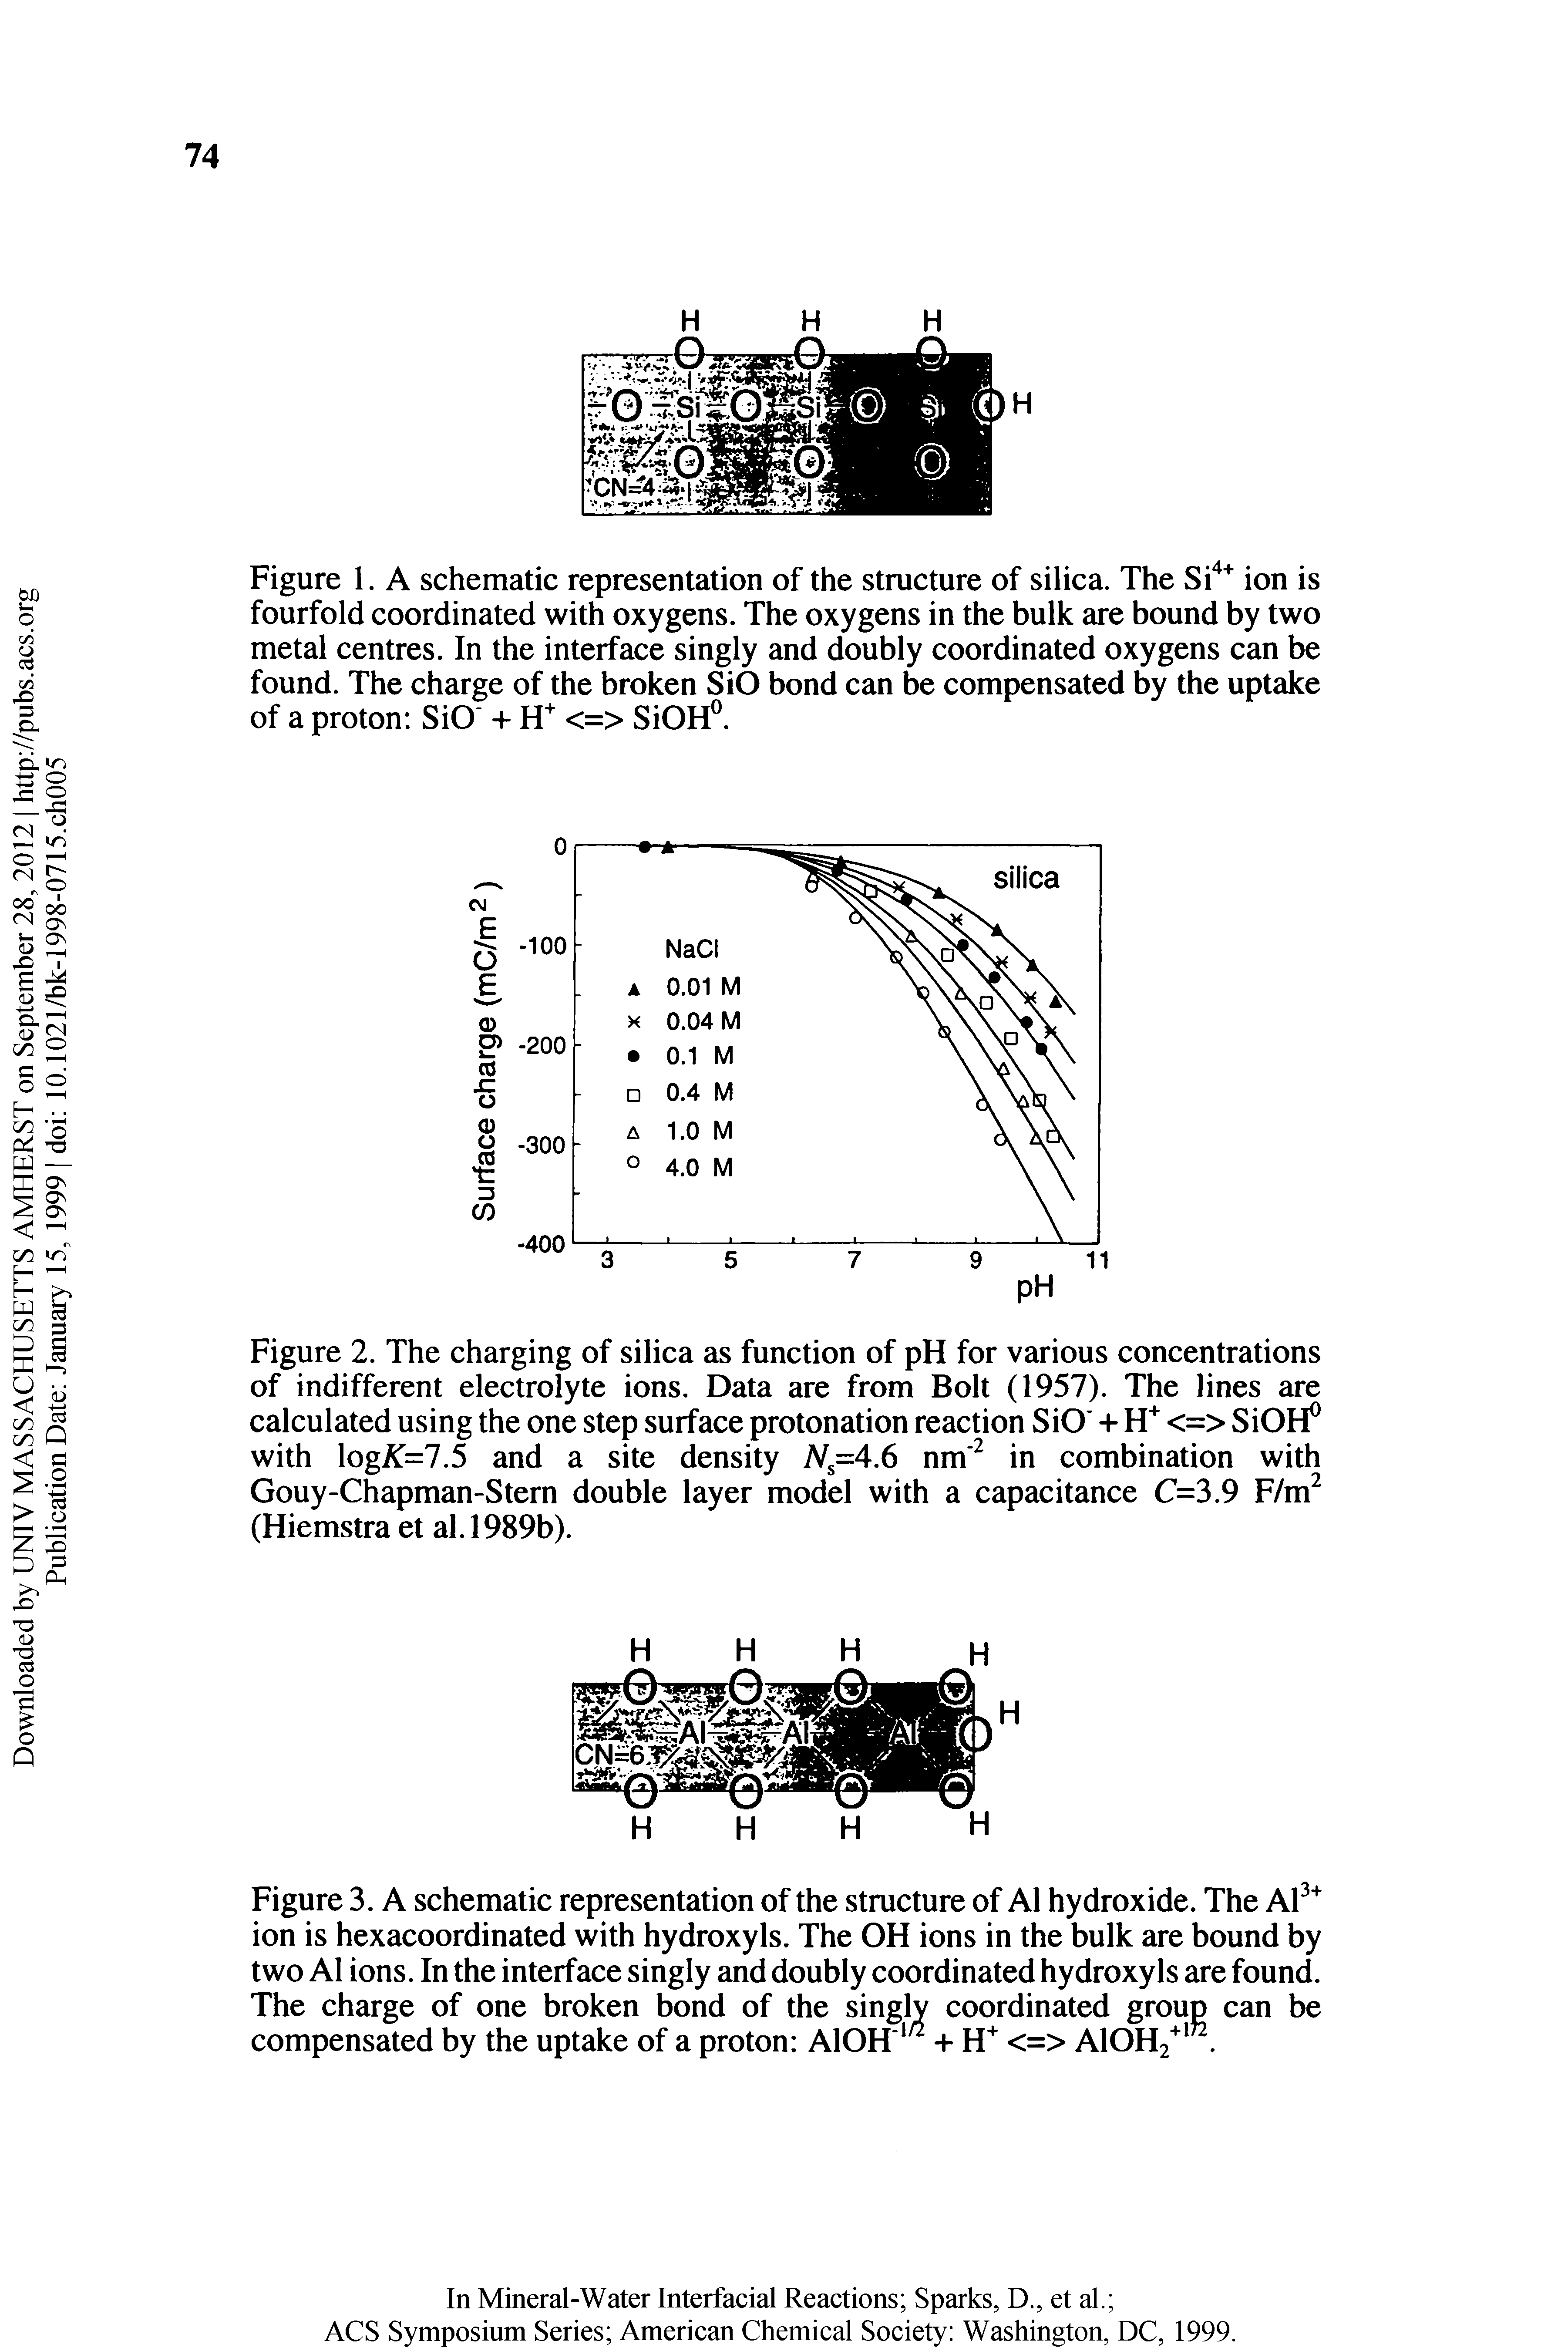 Figure 2. The charging of silica as function of pH for various concentrations of indifferent electrolyte ions. Data are from Bolt (1957). The lines are calculated using the one step surface protonation reaction SiO + <=> SiOH ...